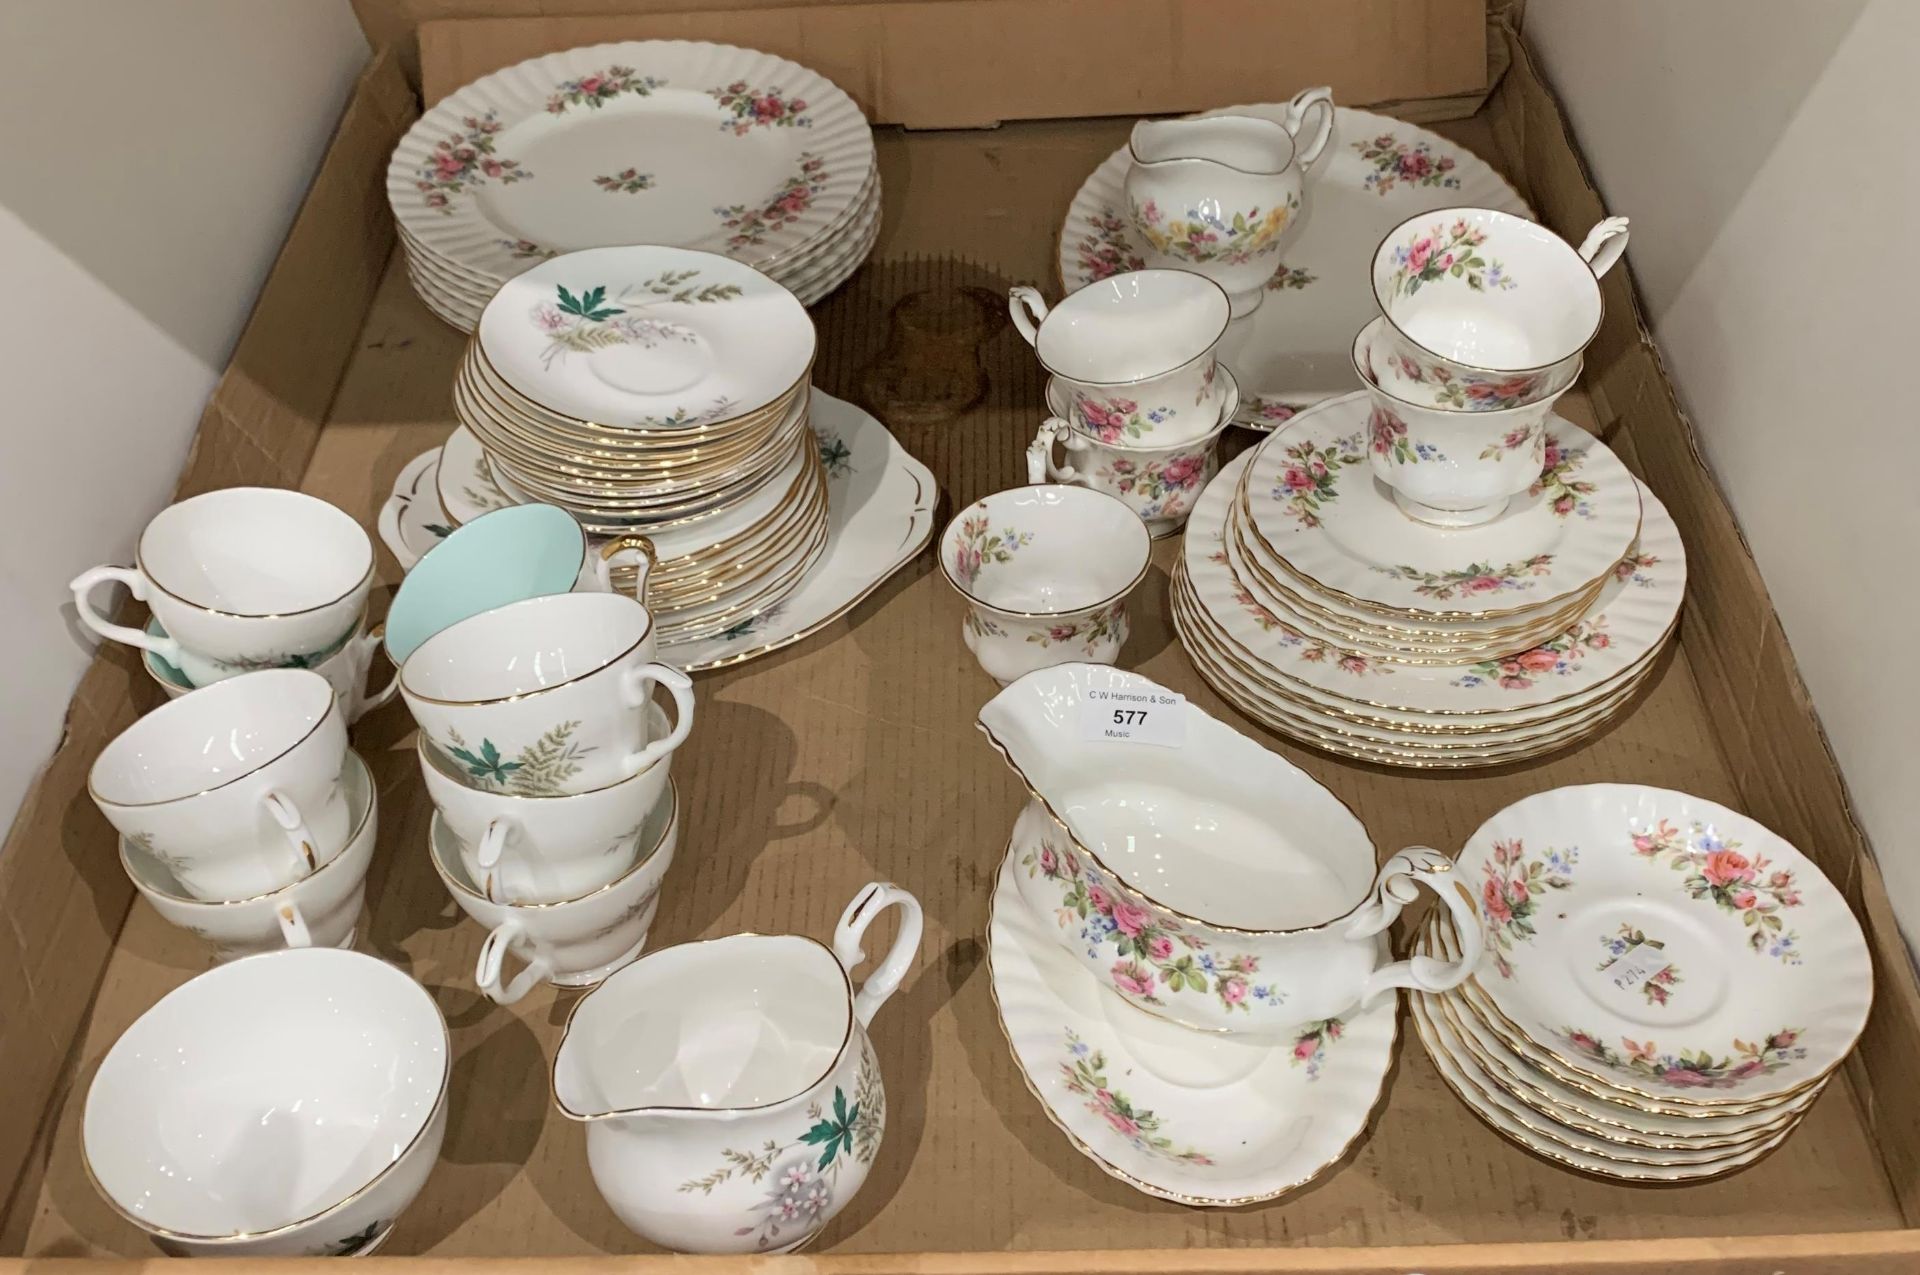 33 pieces of Royal Albert 'Moss Rose' tableware and 32 pieces of Duchess 'Louise' tea service